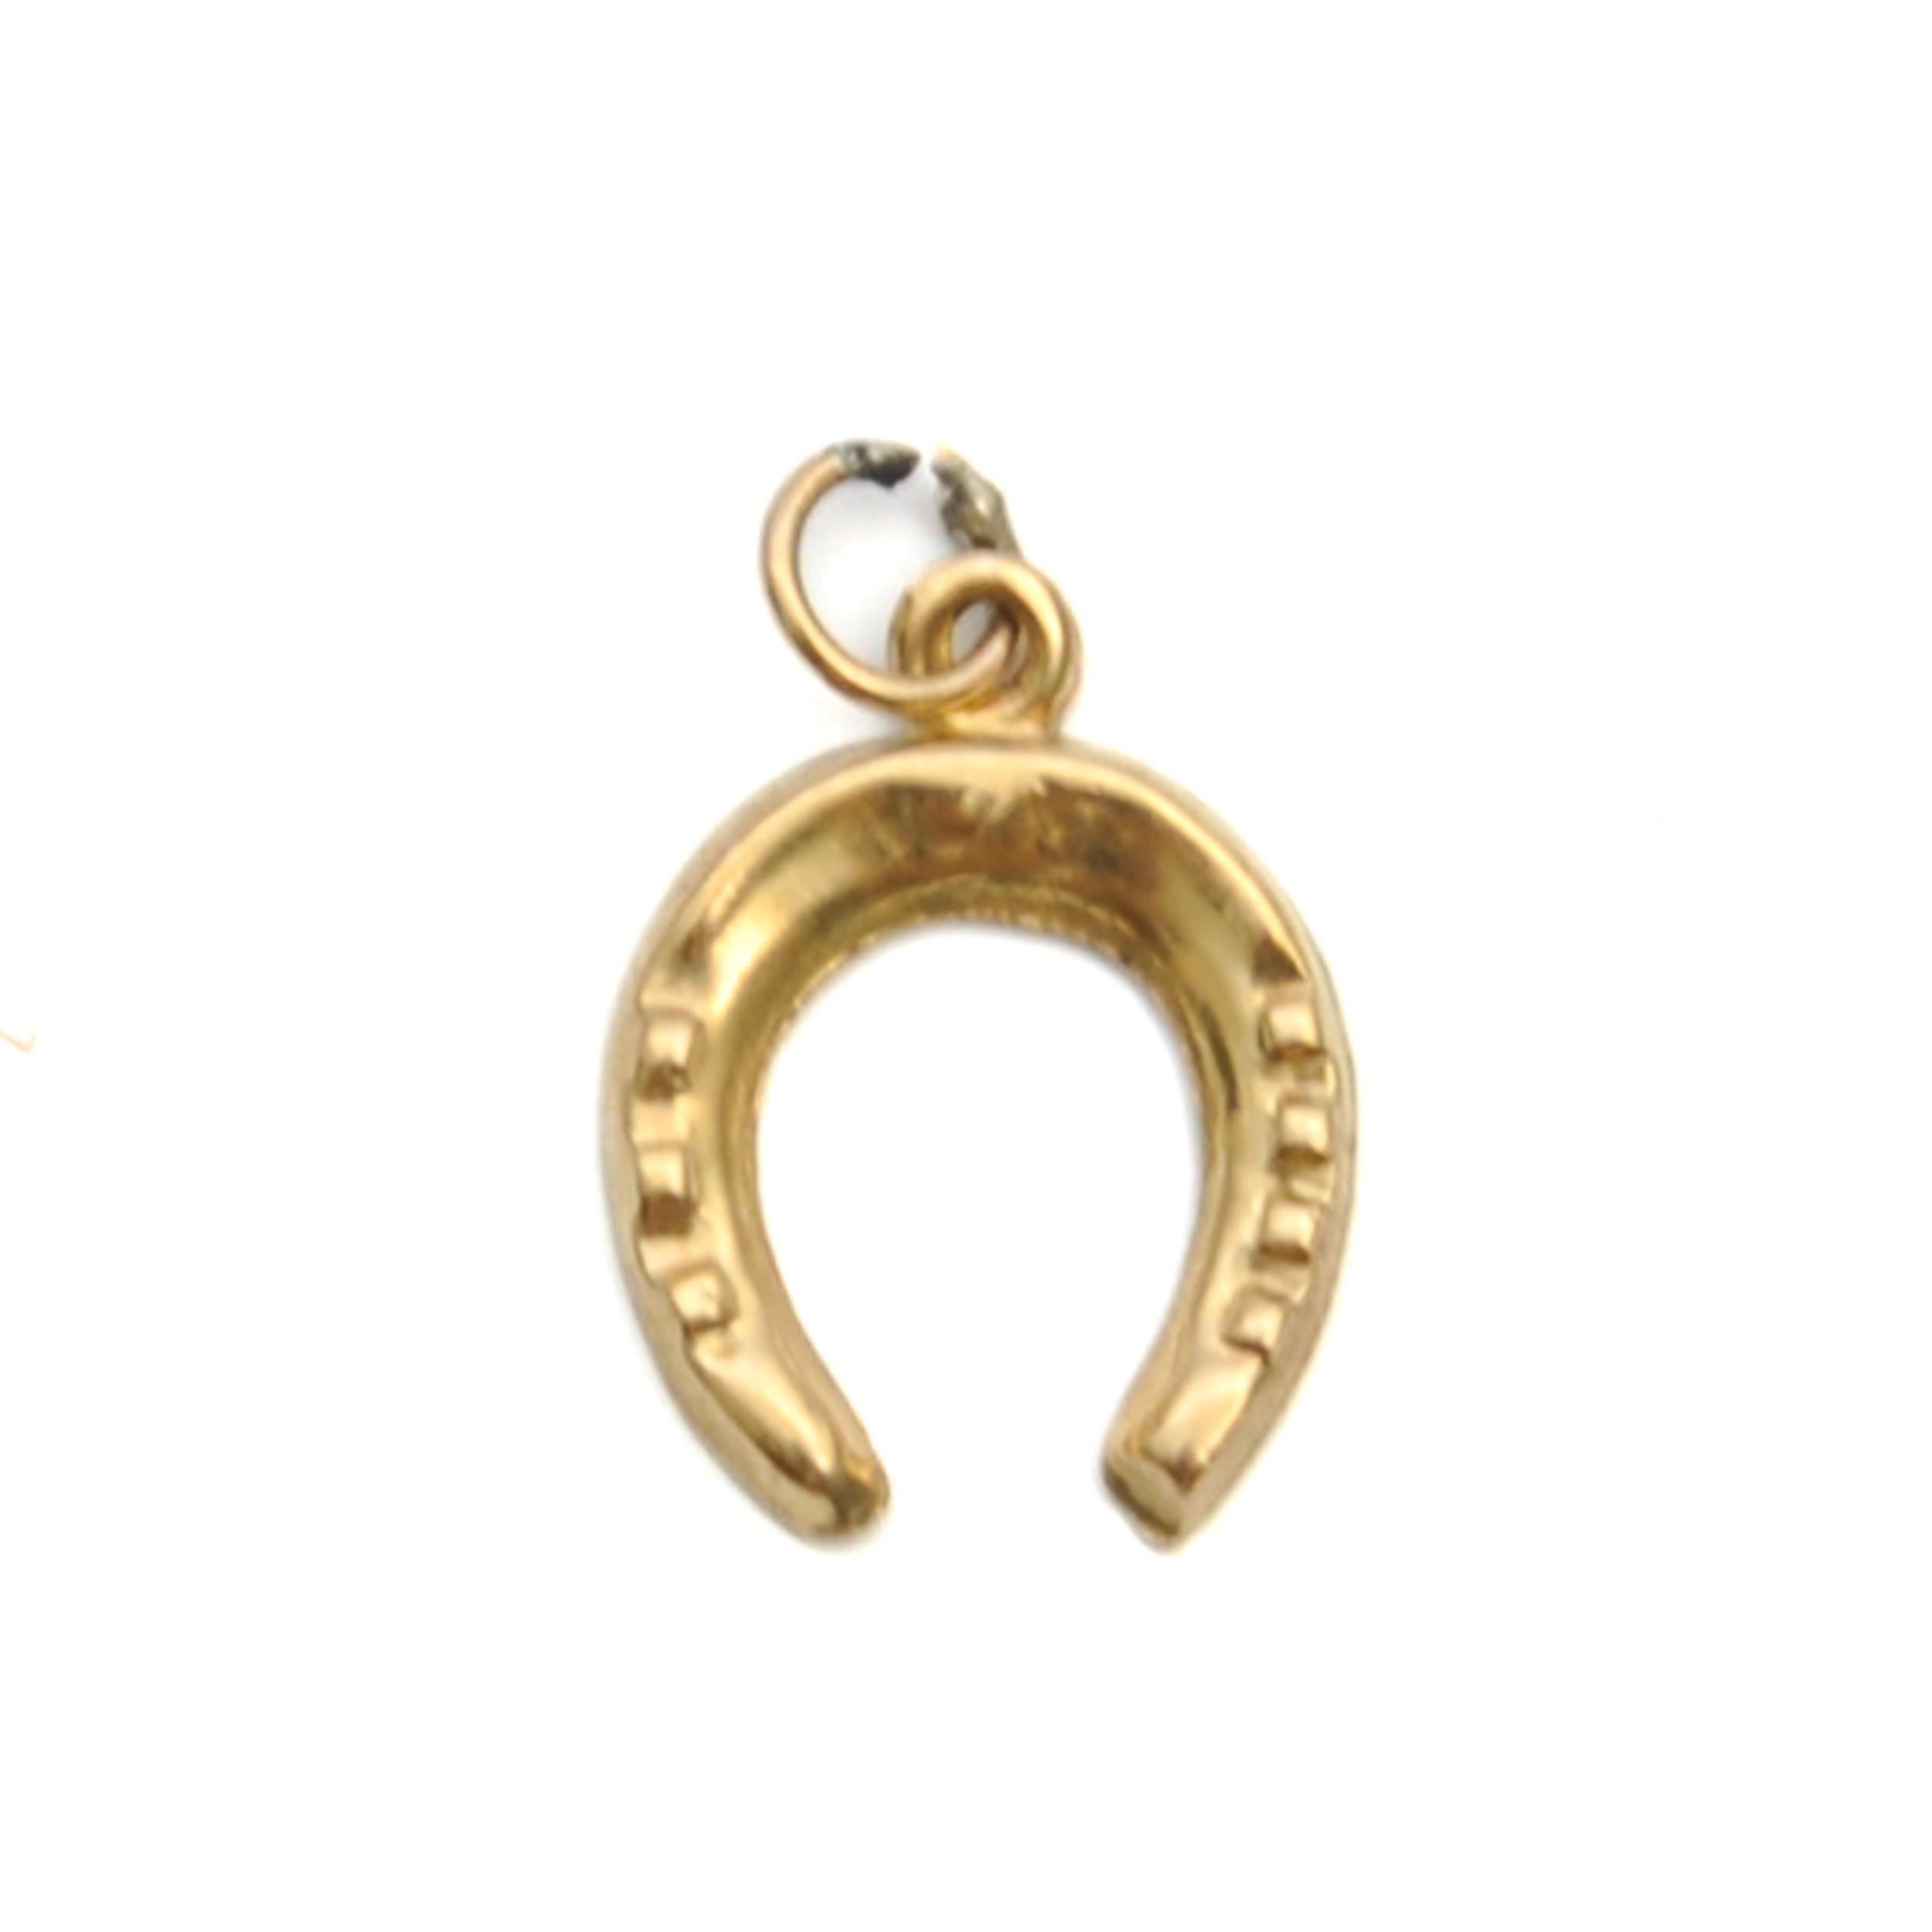 Vintage 9K Gold Lucky Horseshoe Charm Pendant In Good Condition For Sale In Rotterdam, NL